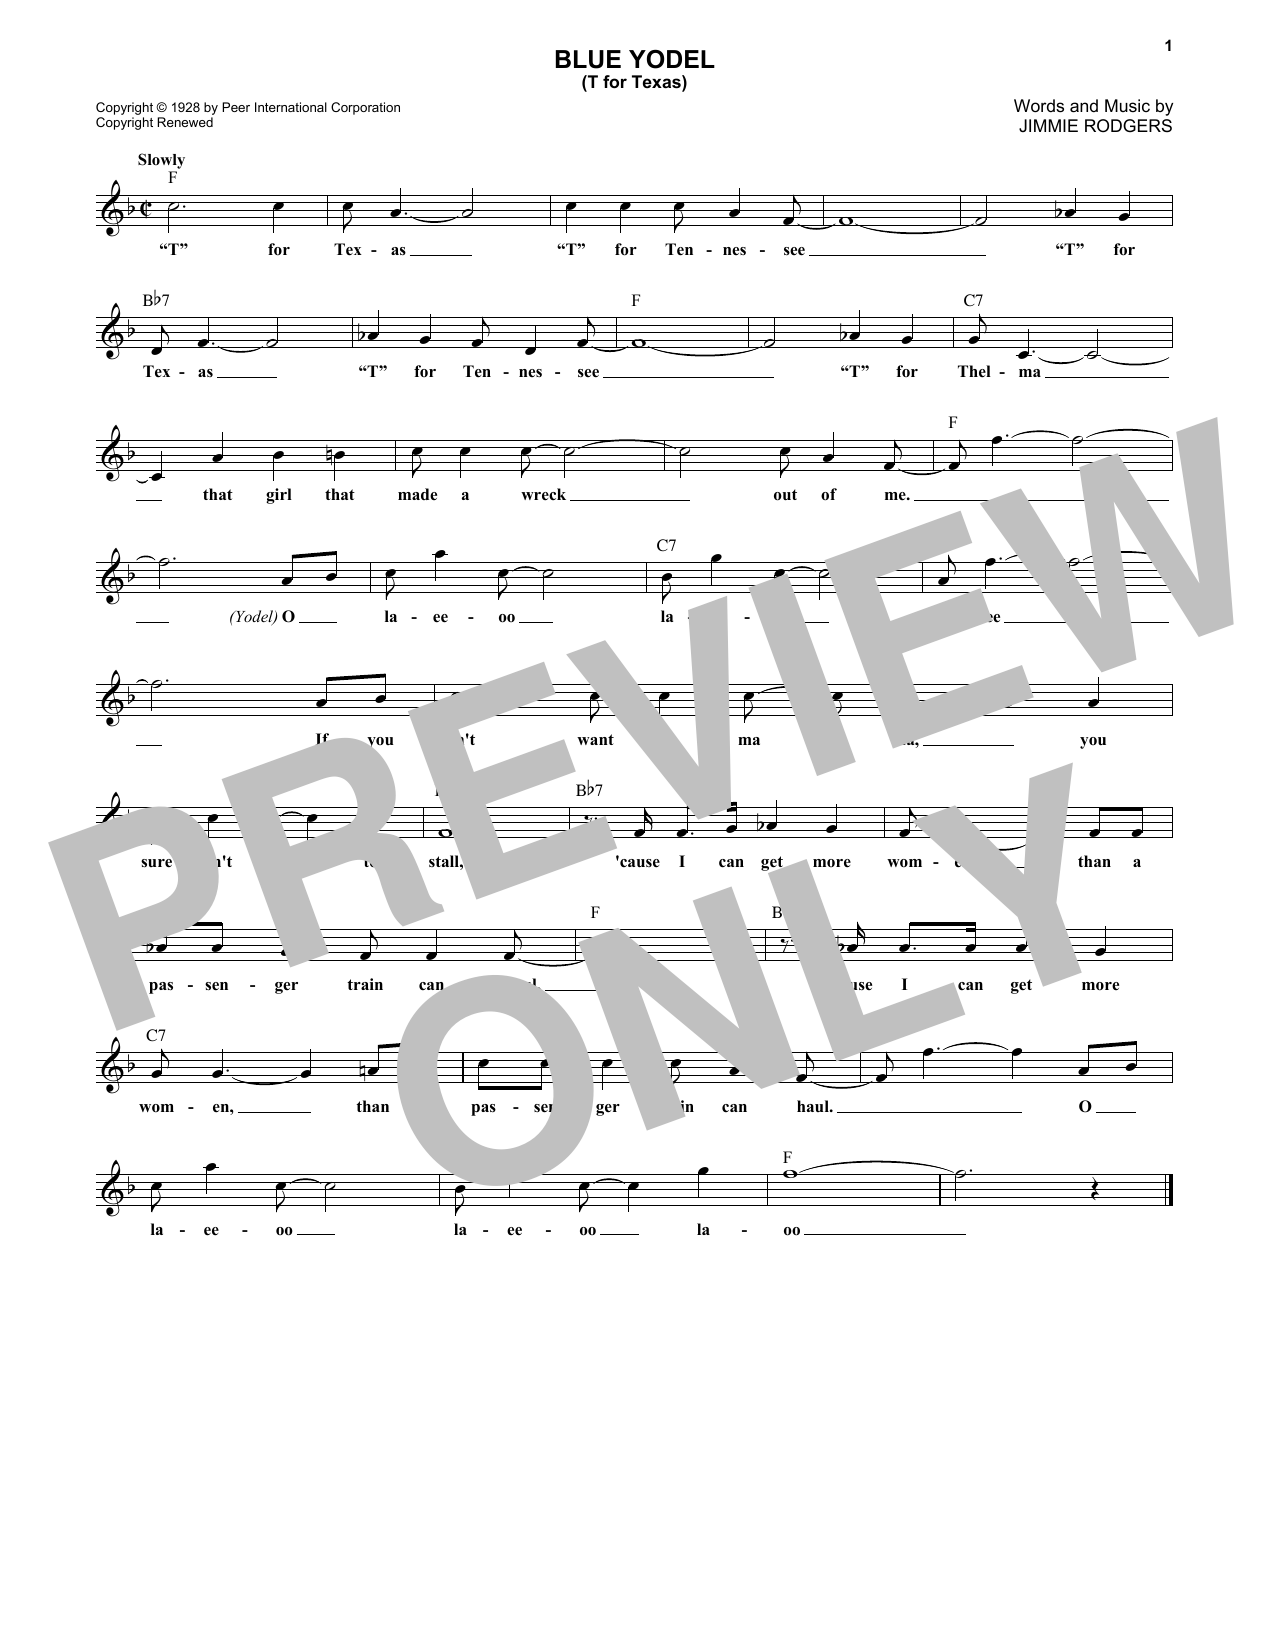 Download Jimmie Rodgers Blue Yodel No. 1 (T For Texas) Sheet Music